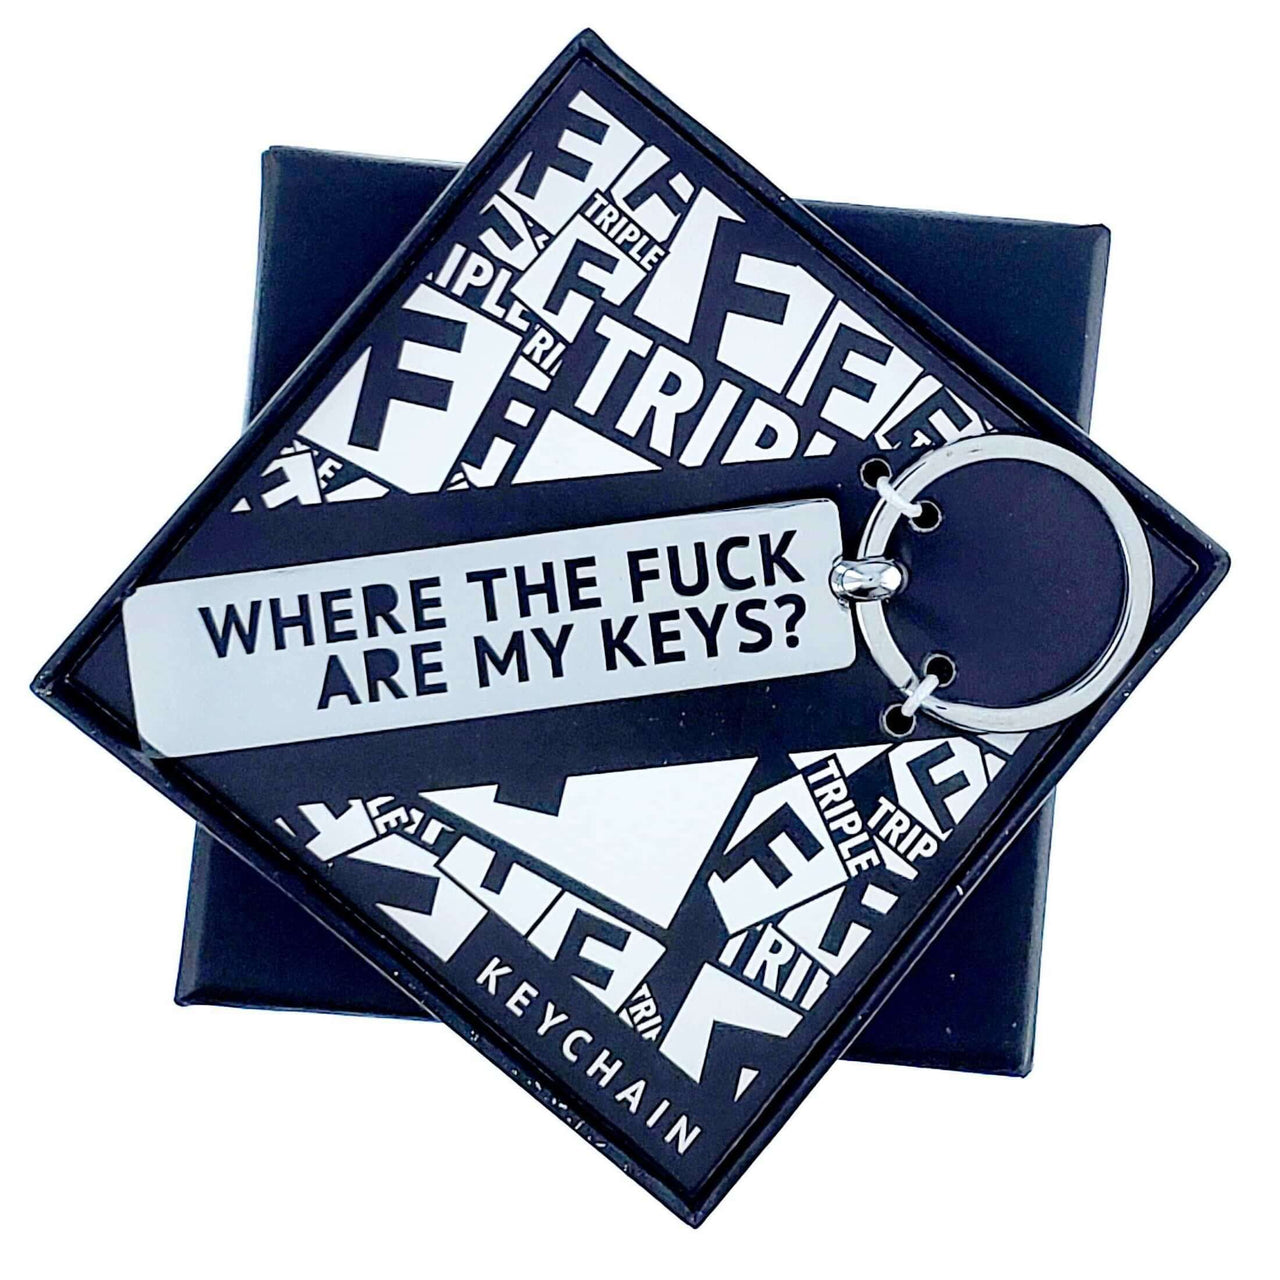 Stainless-Steel 3" Tag Length “WHERE THE F ARE MY KEYS?” Keychain, Men and Women Polished Keychain